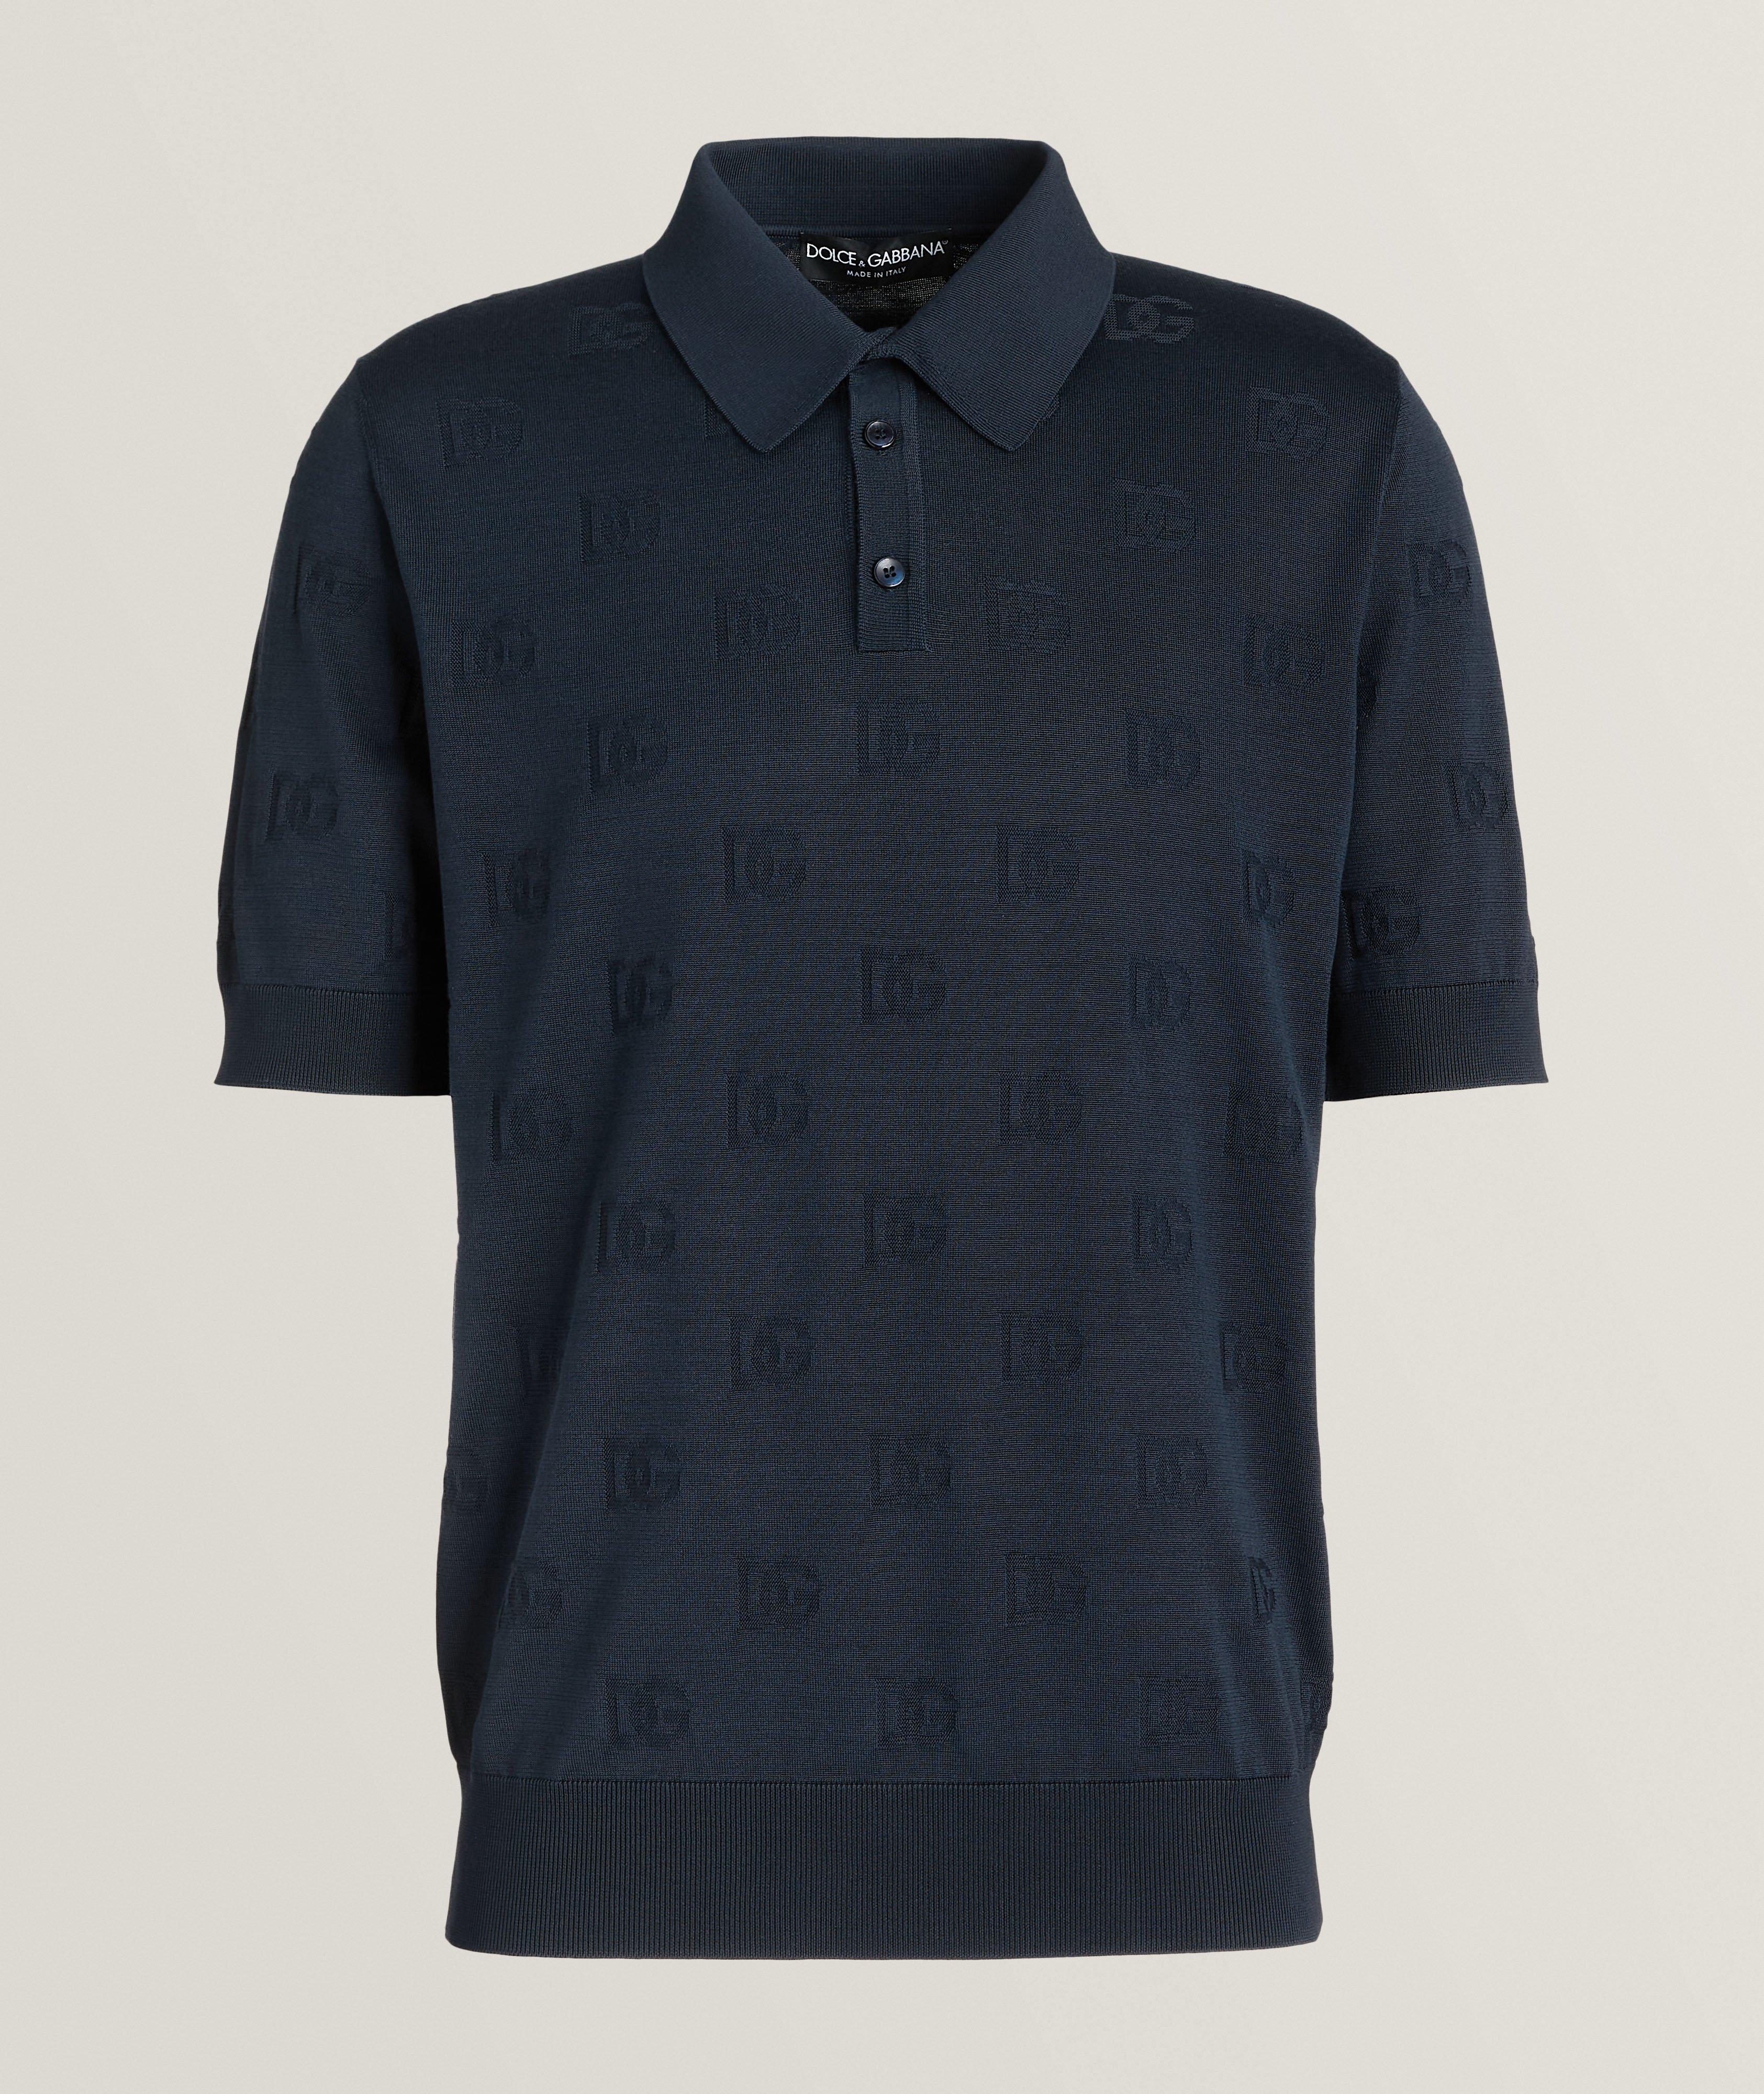 All-Over Embroidery Silk Polo image 0